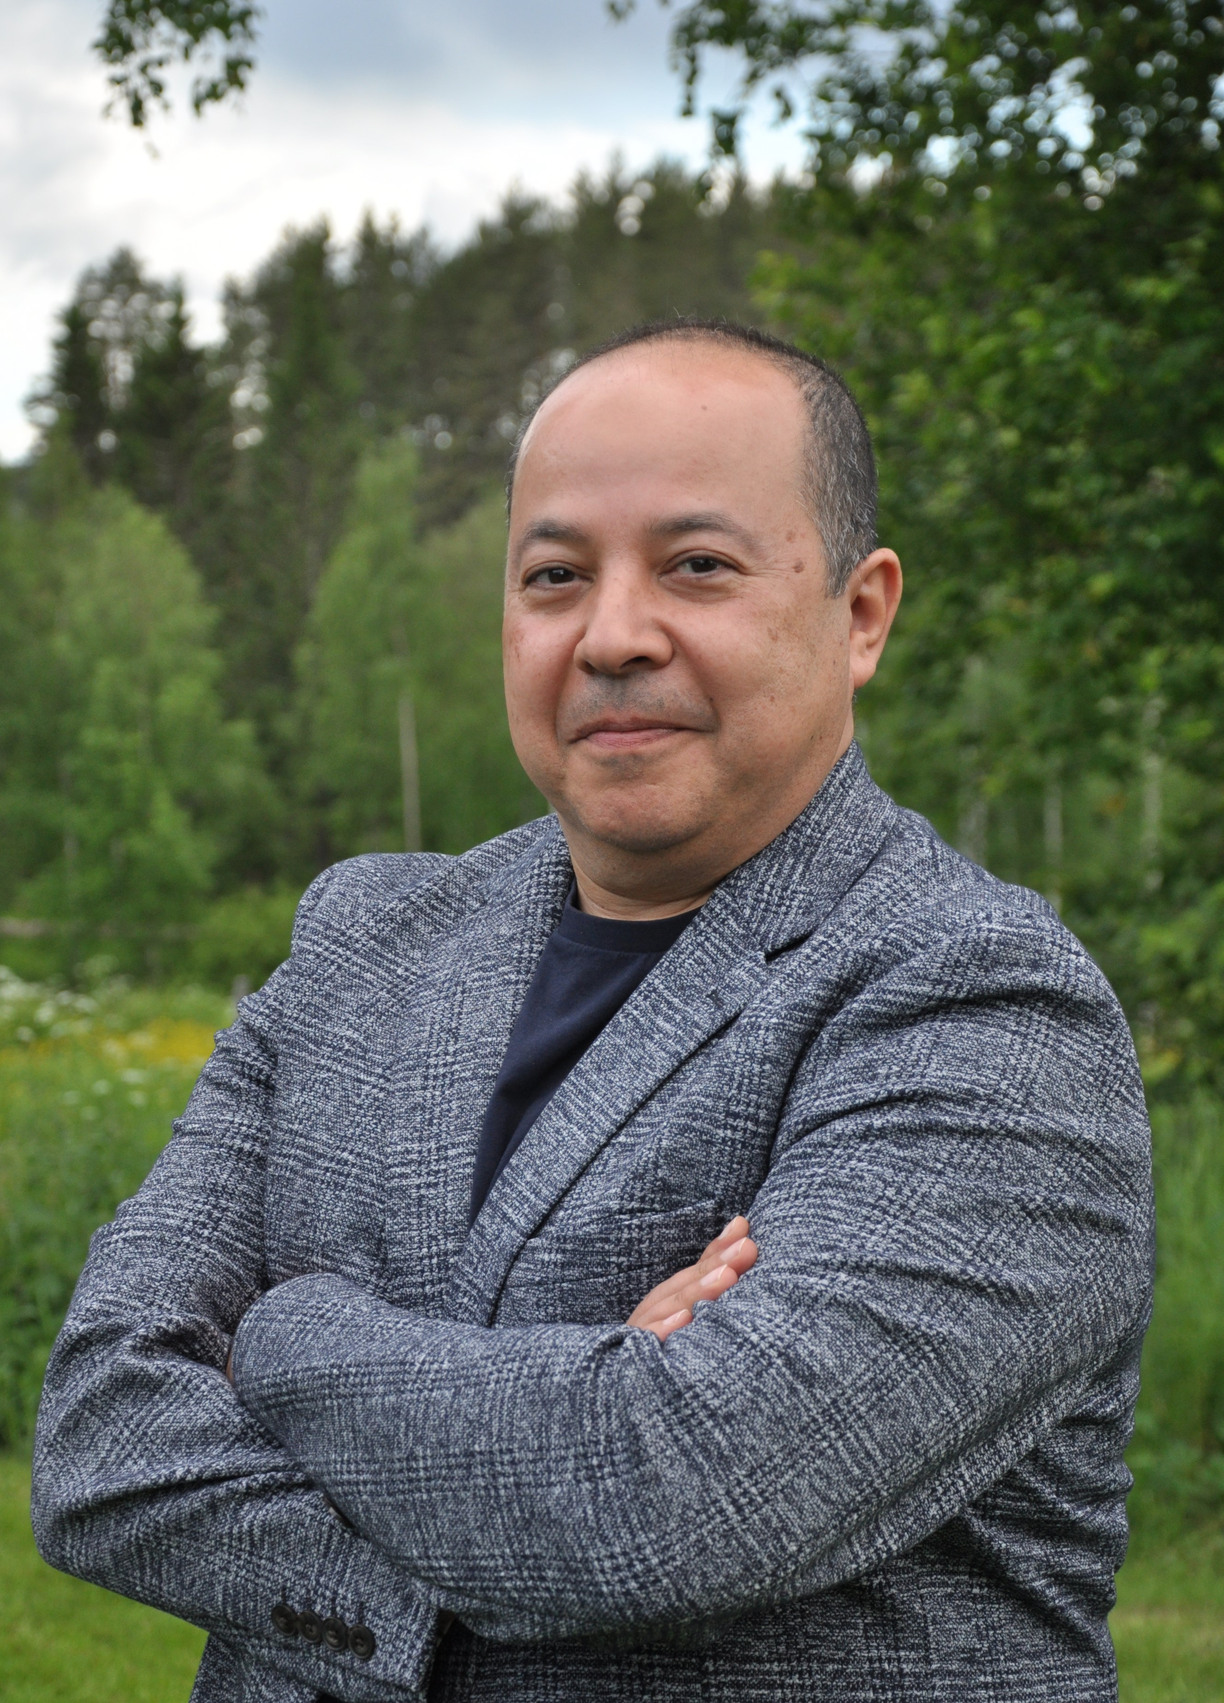 A man with a grey suit. He is outside, green woods in the background.